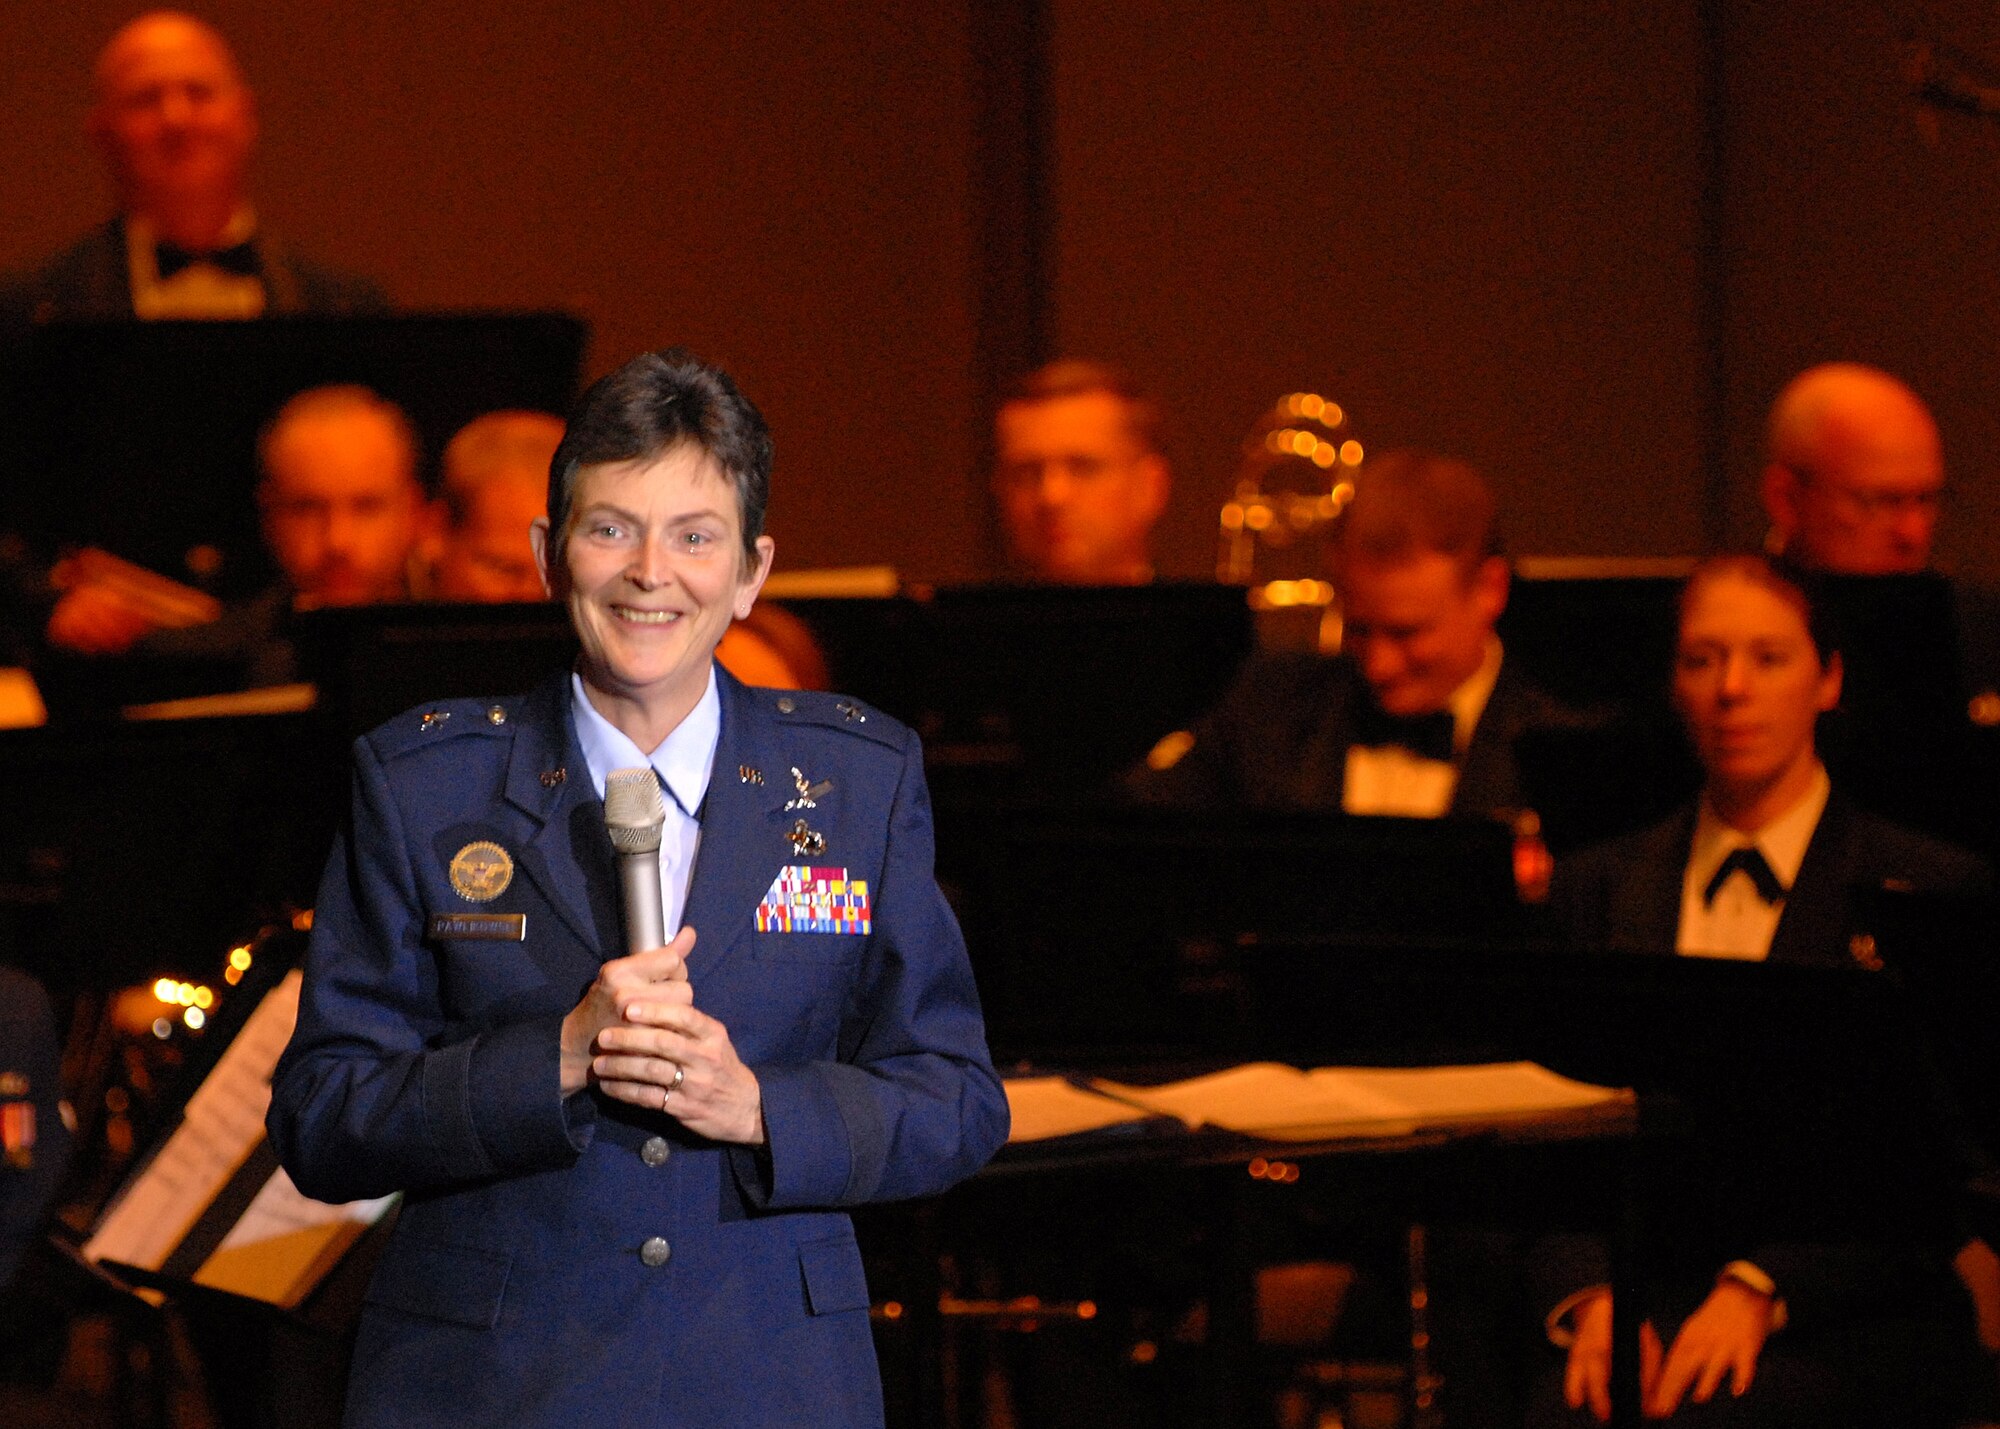 SMC’s Vice Commander Brig. Gen. Ellen Pawlikowski welcomed the Band of the Golden West prior to the group’s performance at the Armstrong Theater in Torrance, Feb. 16. Featuring a mix of music from show tunes to classical to patriotic; the concert was free and open to the public. (Photo by Stephen Schester) 

